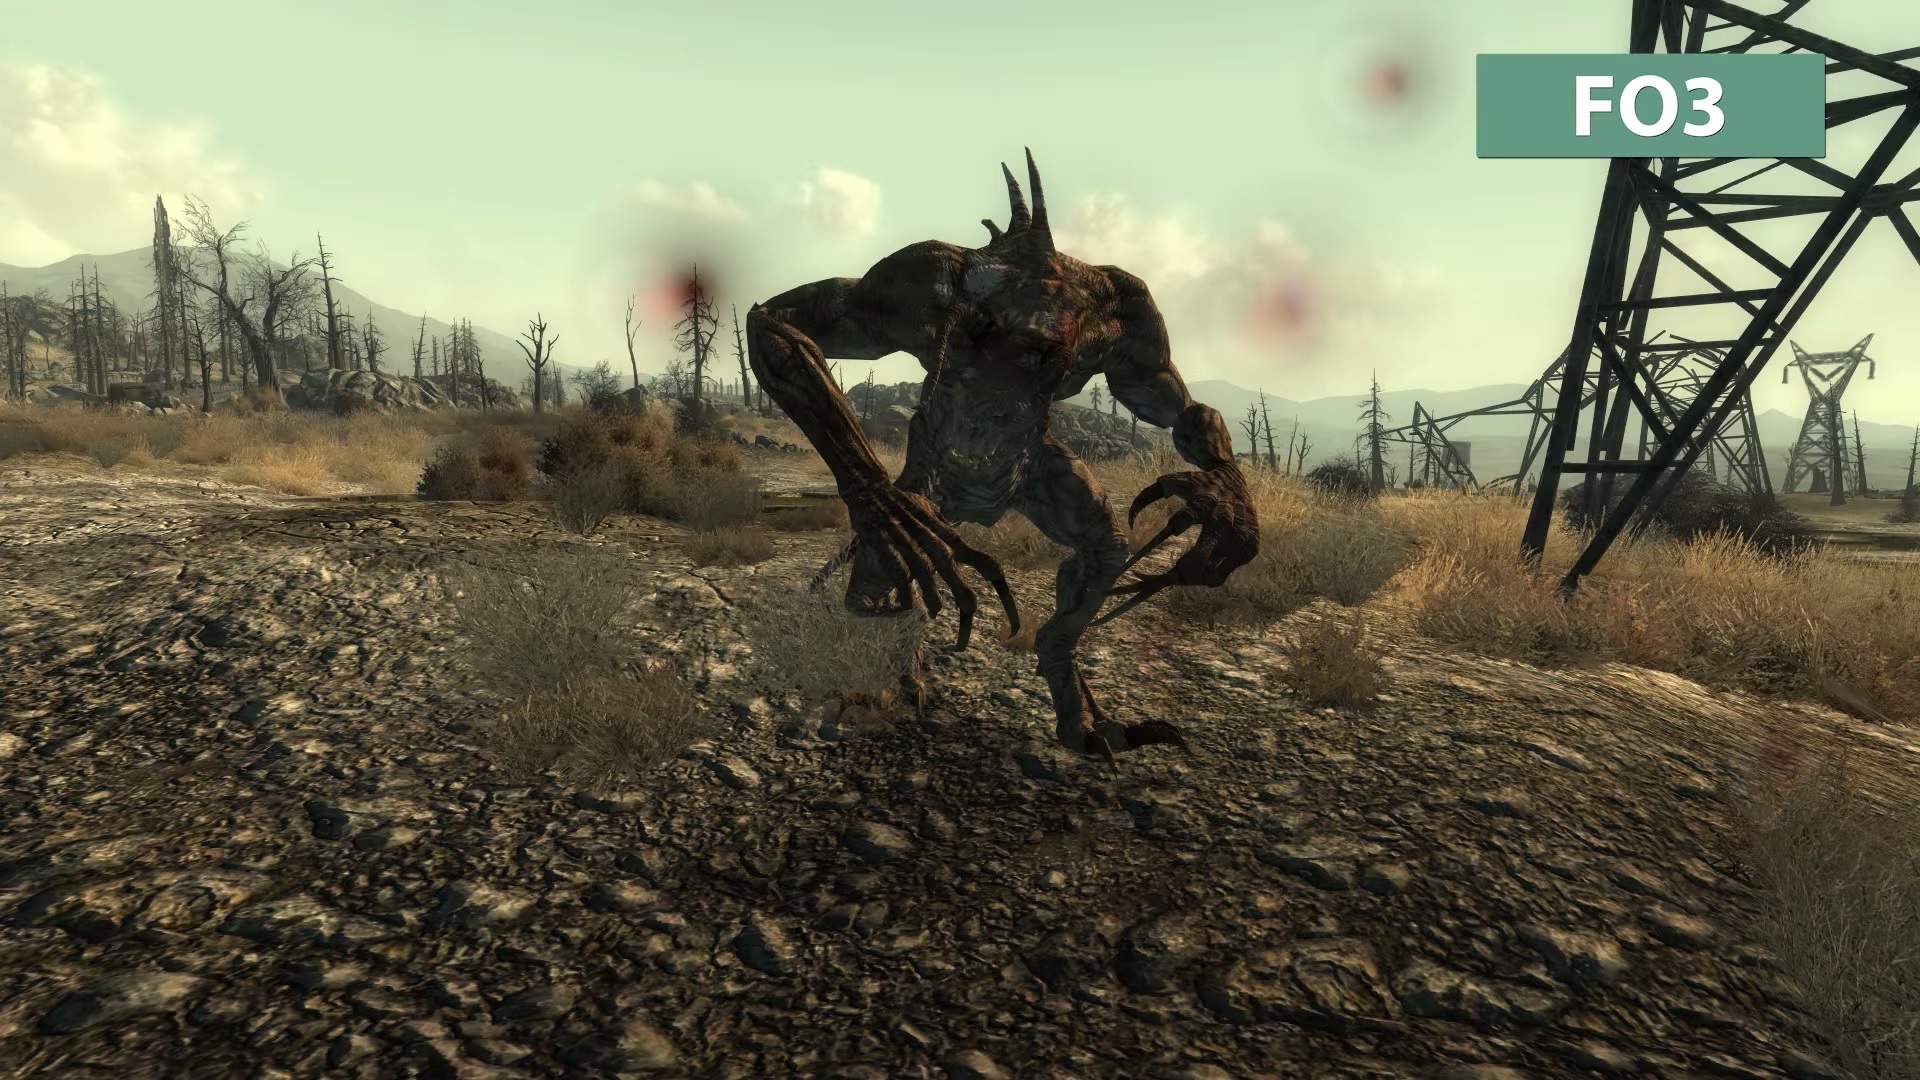 How To Download Fallout 3 On Xbox One